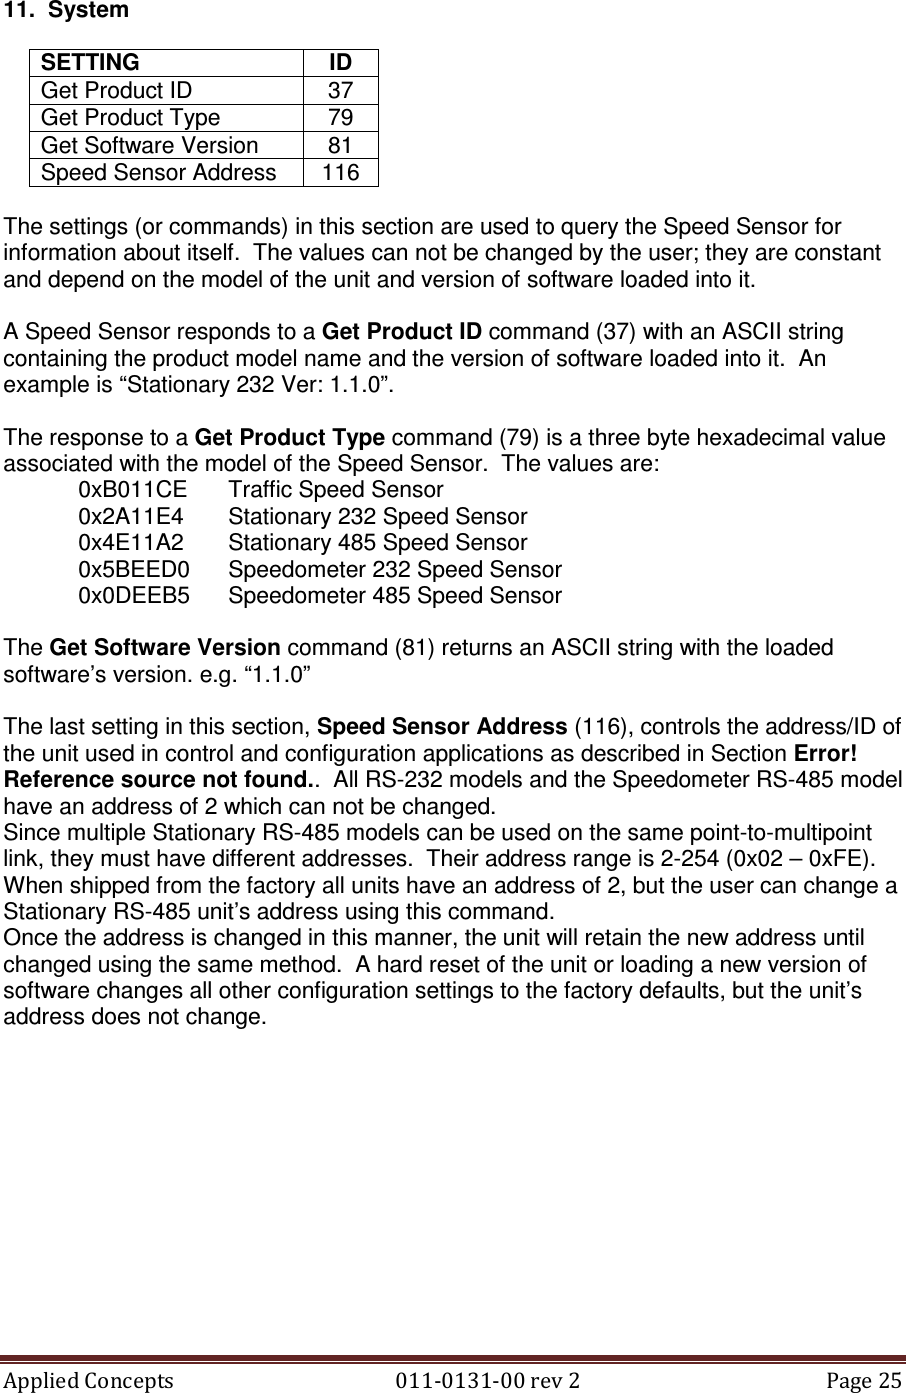 Applied Concepts                                            011-0131-00 rev 2  Page 25  11.  System  SETTING  ID Get Product ID  37 Get Product Type  79 Get Software Version  81 Speed Sensor Address  116  The settings (or commands) in this section are used to query the Speed Sensor for information about itself.  The values can not be changed by the user; they are constant and depend on the model of the unit and version of software loaded into it.  A Speed Sensor responds to a Get Product ID command (37) with an ASCII string containing the product model name and the version of software loaded into it.  An example is “Stationary 232 Ver: 1.1.0”.  The response to a Get Product Type command (79) is a three byte hexadecimal value associated with the model of the Speed Sensor.  The values are:   0xB011CE  Traffic Speed Sensor   0x2A11E4  Stationary 232 Speed Sensor   0x4E11A2  Stationary 485 Speed Sensor   0x5BEED0  Speedometer 232 Speed Sensor   0x0DEEB5  Speedometer 485 Speed Sensor  The Get Software Version command (81) returns an ASCII string with the loaded software’s version. e.g. “1.1.0”  The last setting in this section, Speed Sensor Address (116), controls the address/ID of the unit used in control and configuration applications as described in Section Error! Reference source not found..  All RS-232 models and the Speedometer RS-485 model have an address of 2 which can not be changed. Since multiple Stationary RS-485 models can be used on the same point-to-multipoint link, they must have different addresses.  Their address range is 2-254 (0x02 – 0xFE).  When shipped from the factory all units have an address of 2, but the user can change a Stationary RS-485 unit’s address using this command. Once the address is changed in this manner, the unit will retain the new address until changed using the same method.  A hard reset of the unit or loading a new version of software changes all other configuration settings to the factory defaults, but the unit’s address does not change.     